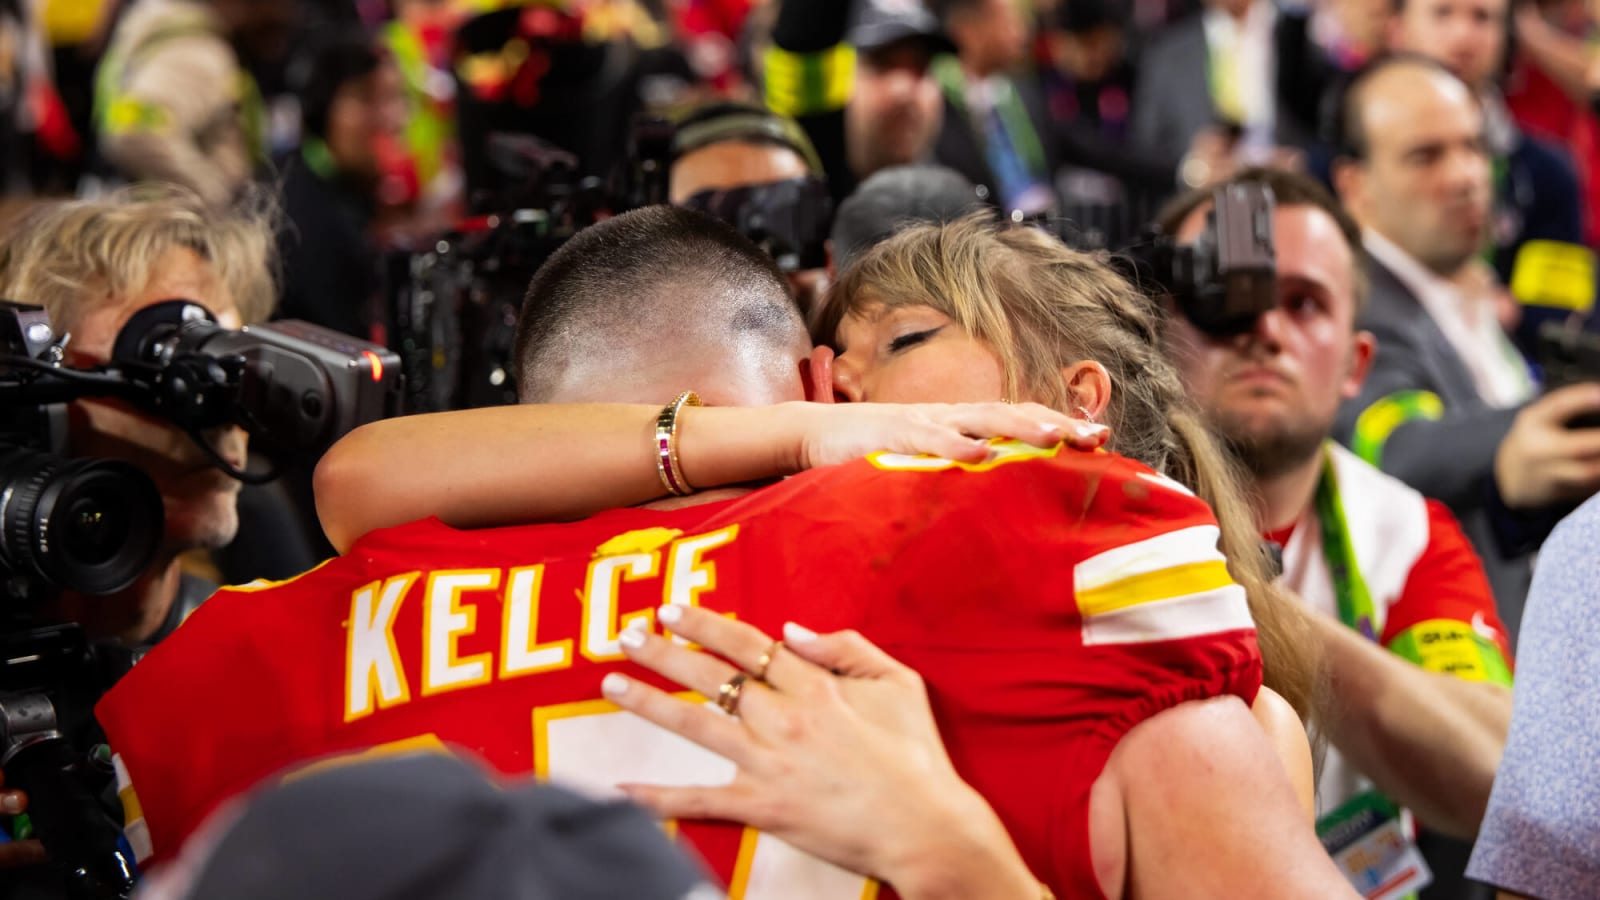 'She’s our little sister!' Chiefs coach Dave Merritt, who is interviewing for 49ers DC job, calls Taylor Swift ‘part of the family’